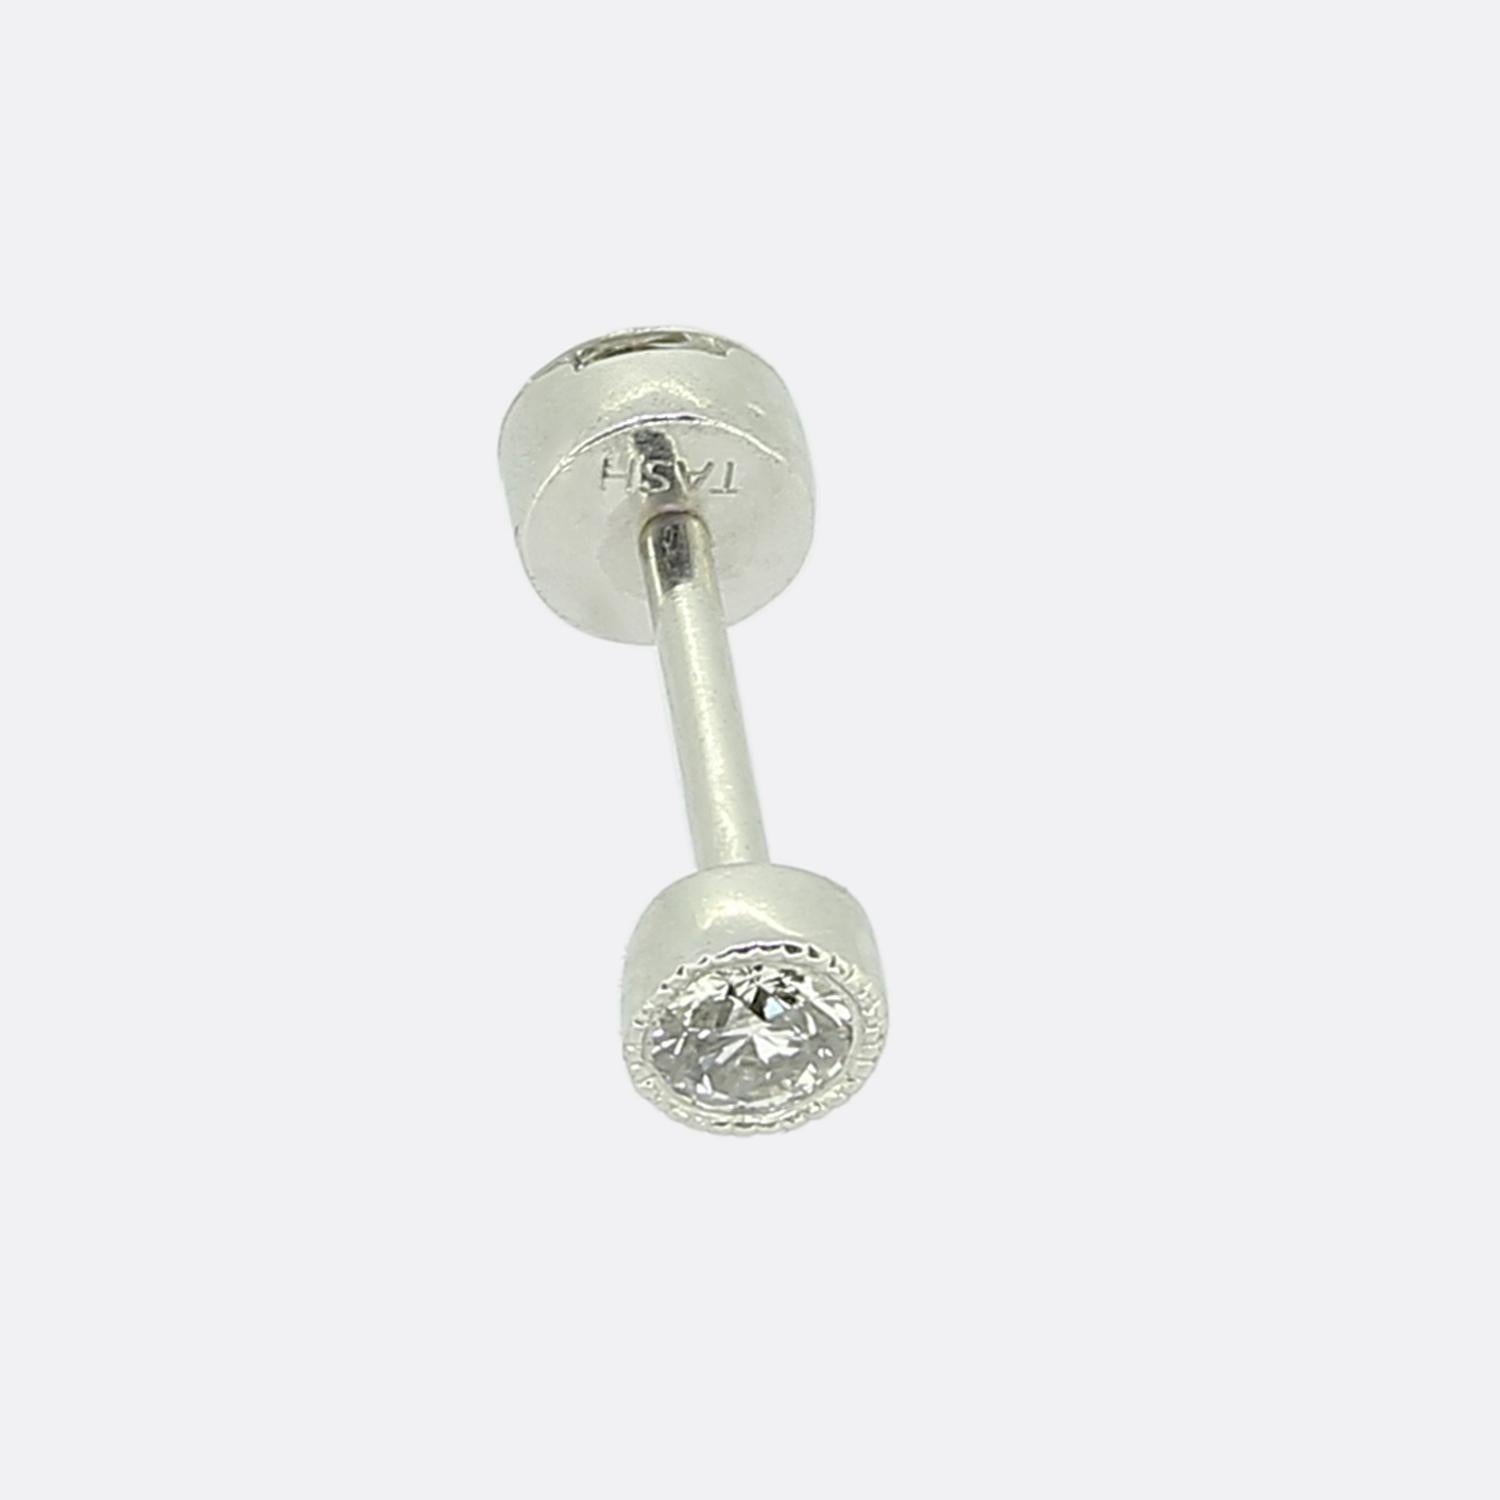 Here we have a wonderful 18ct white gold diamond stud earring from the contemporary jeweller Maria Tash. The earring features a 0.24 carat round brilliant cut diamond that sits in the 'invisible' mount. This earring also has a diamond set post or